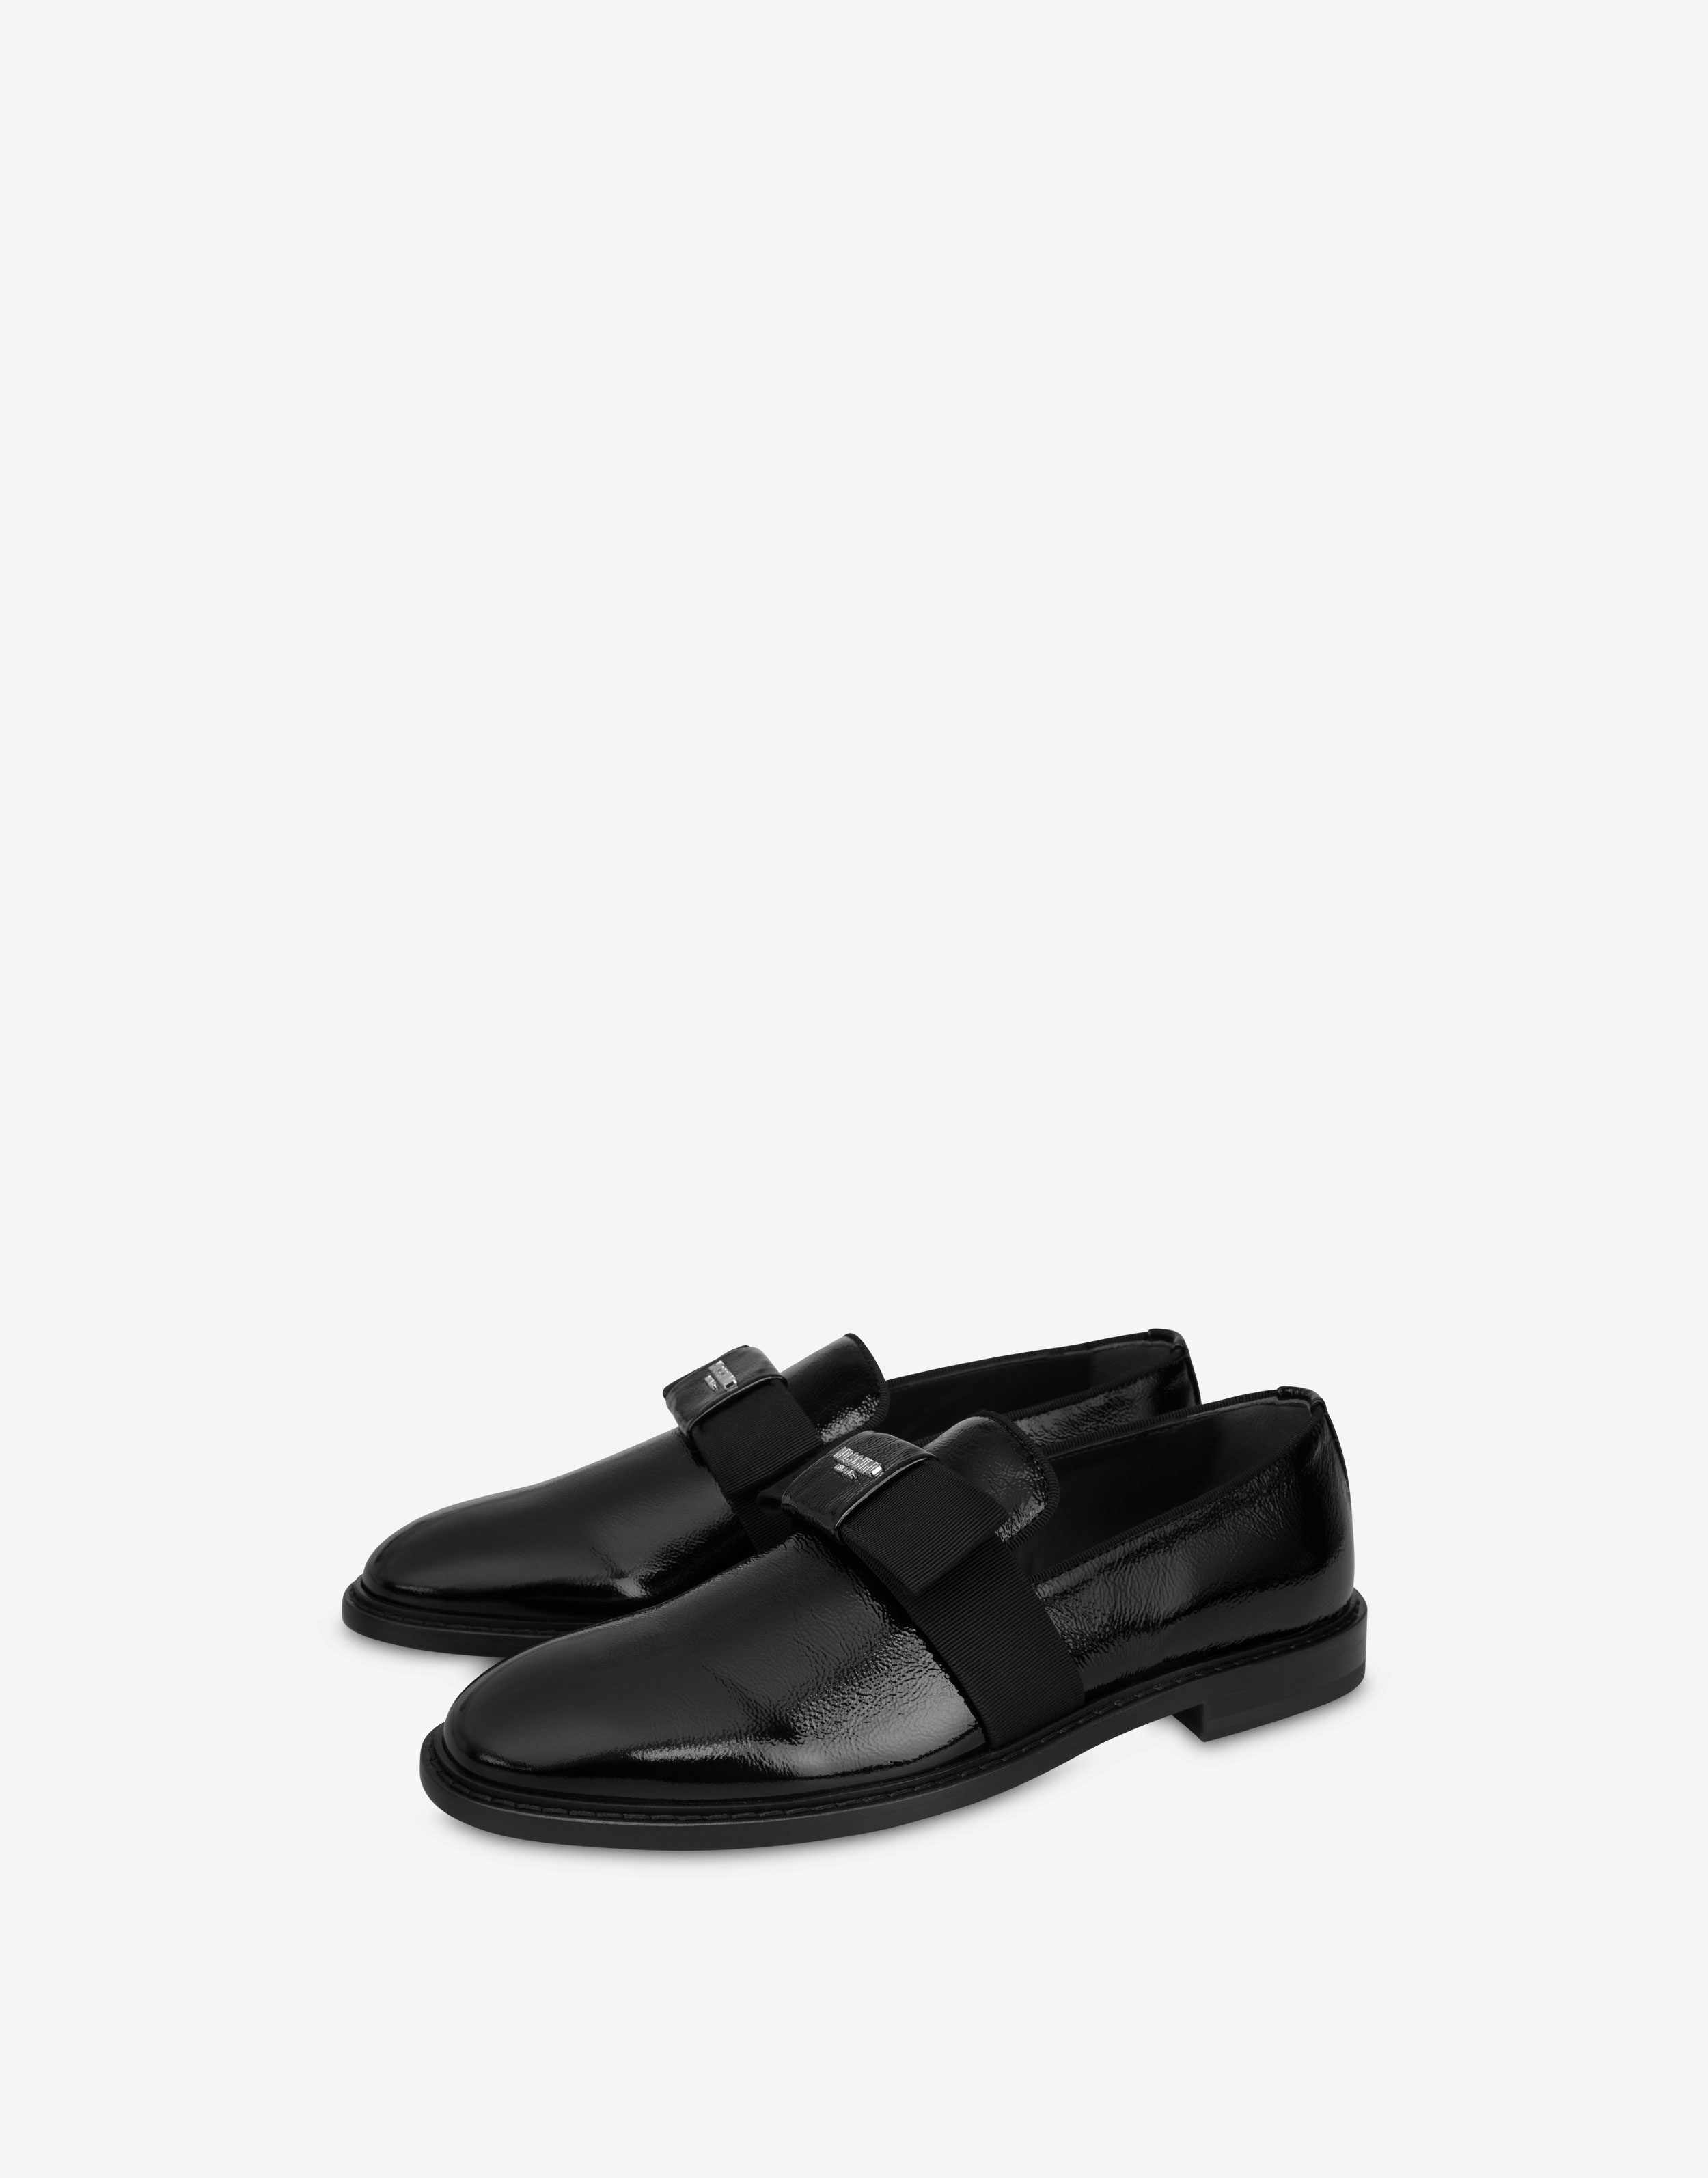 Moschino Plate naplak loafers